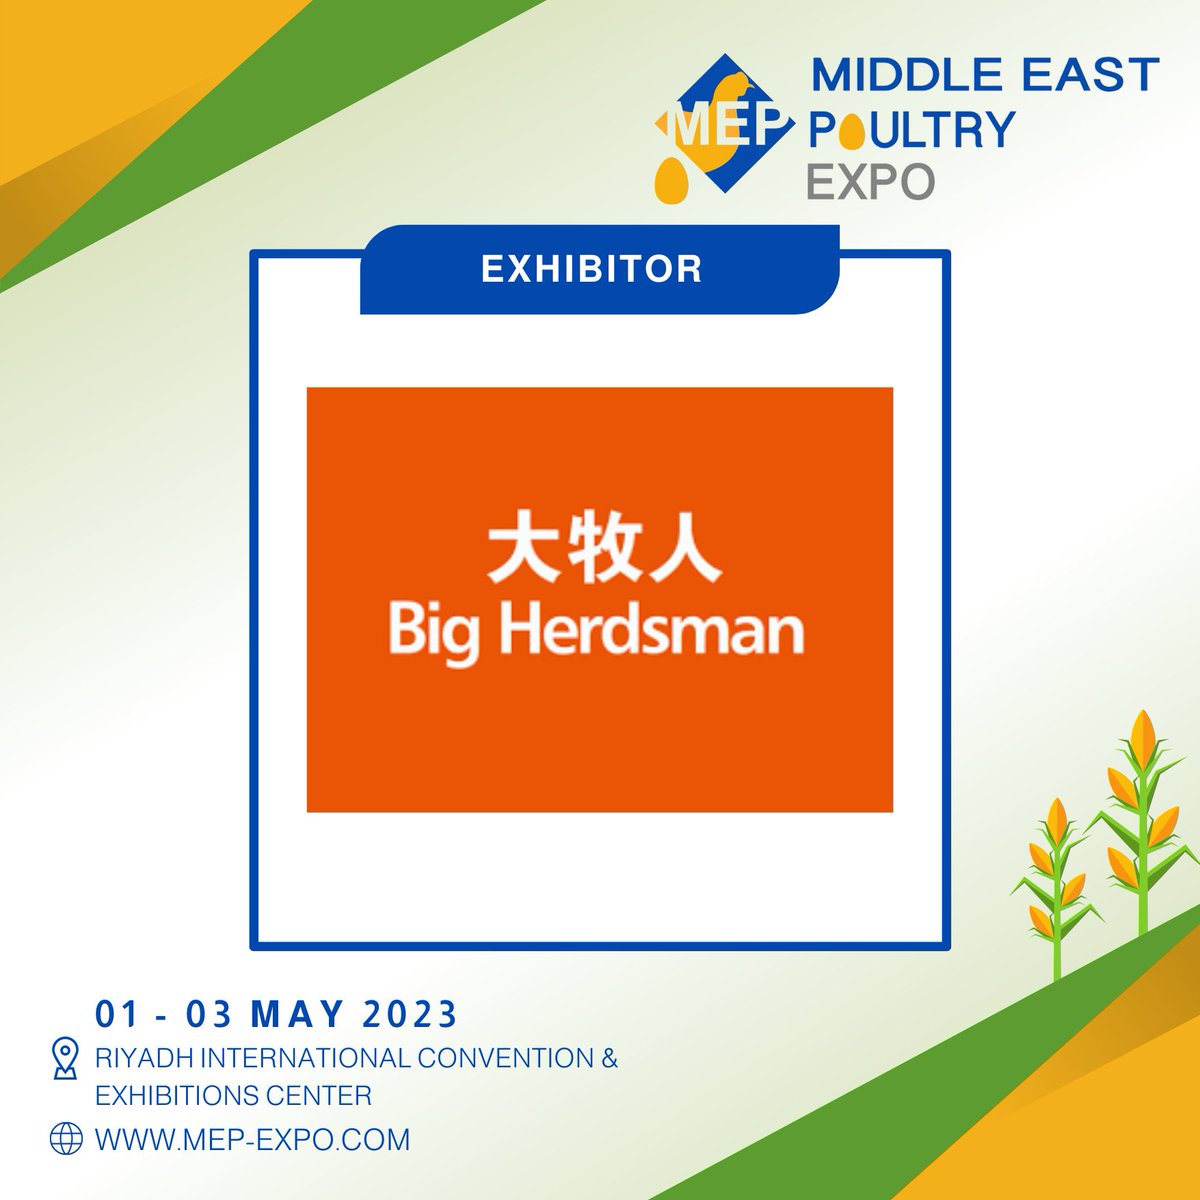 We are pleased to welcome our exhibitor Big Herdsman  at #Middle_East_Poultry_Expo 2023

mep-expo.com

#poultry #poultryequipment #poultryindustry #poultryfarming #eggproduction #saudipoultry #poultryhouse